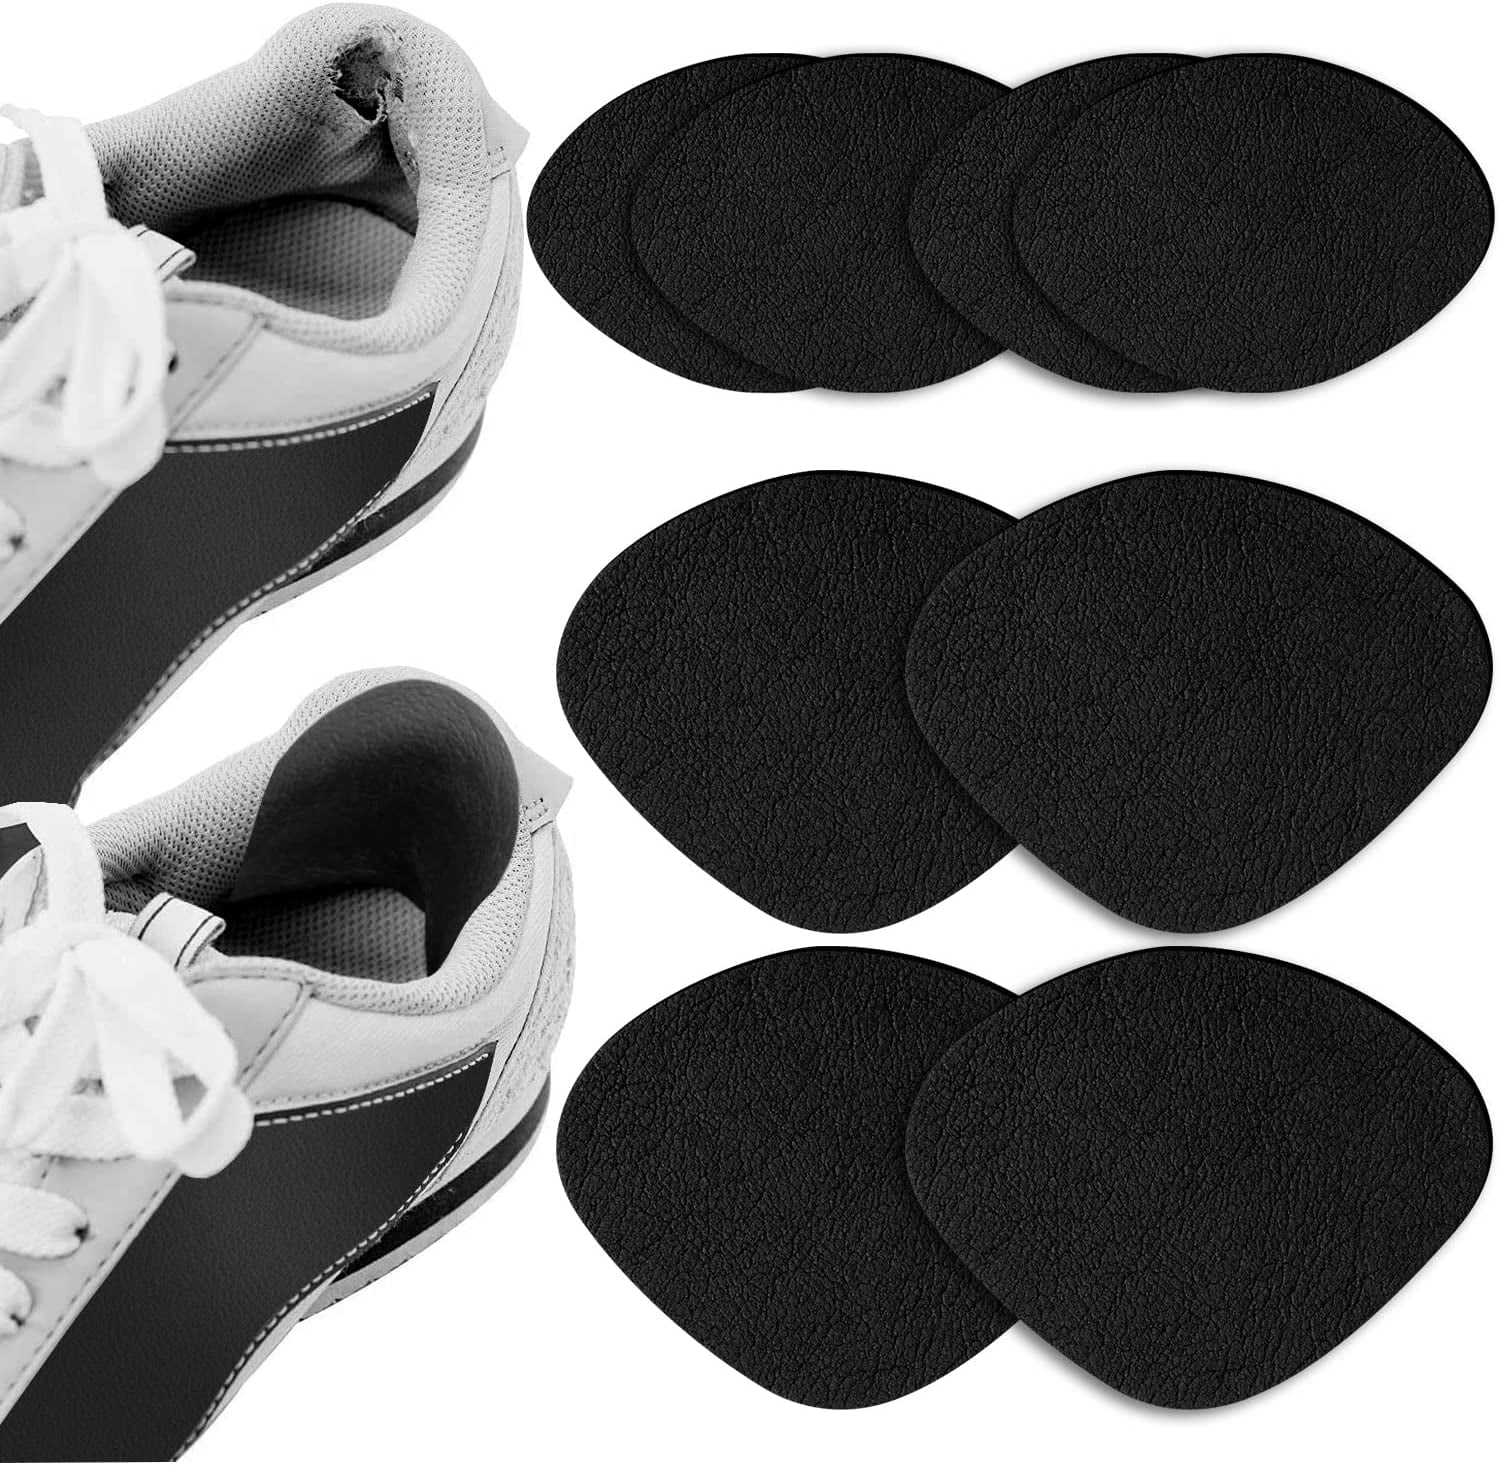 Shoe Heel Repair One House 4 Pairs Self Adhesive Inside Shoe Patches for Holes Shoe Hole Repair Patch Kit for Sneaker Leather Shoes High Heels 5c3eac0e 5c01 4bc4 b18b 137d2bcd5754.05147de93d793a3ab63e3f0f0d7f7088